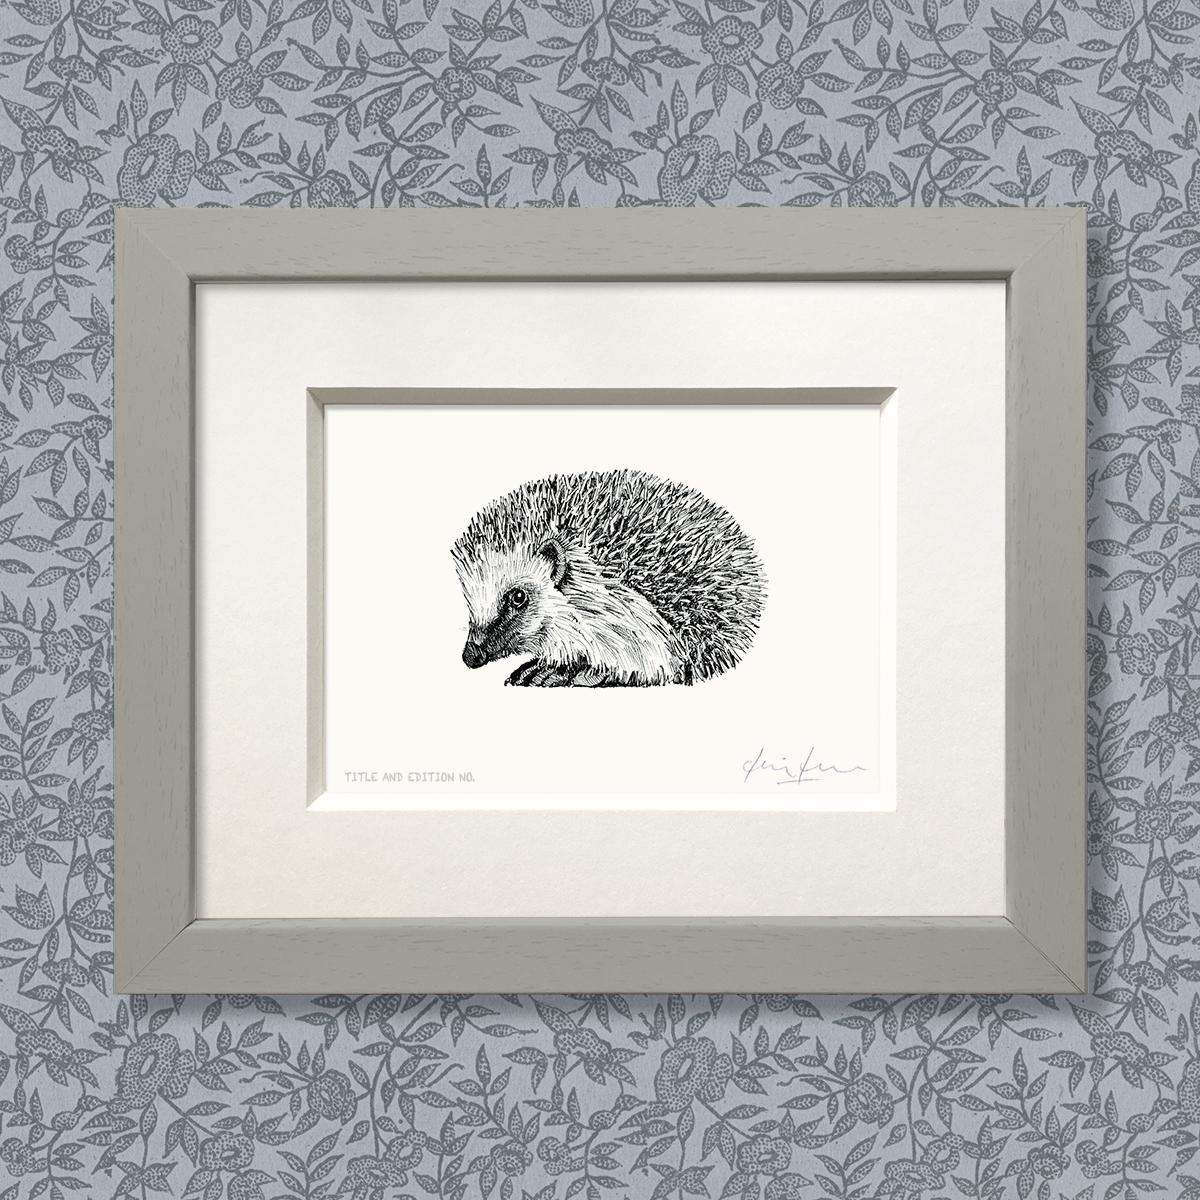 Limited edition print from pen and ink drawing of a hedgehog in a grey frame